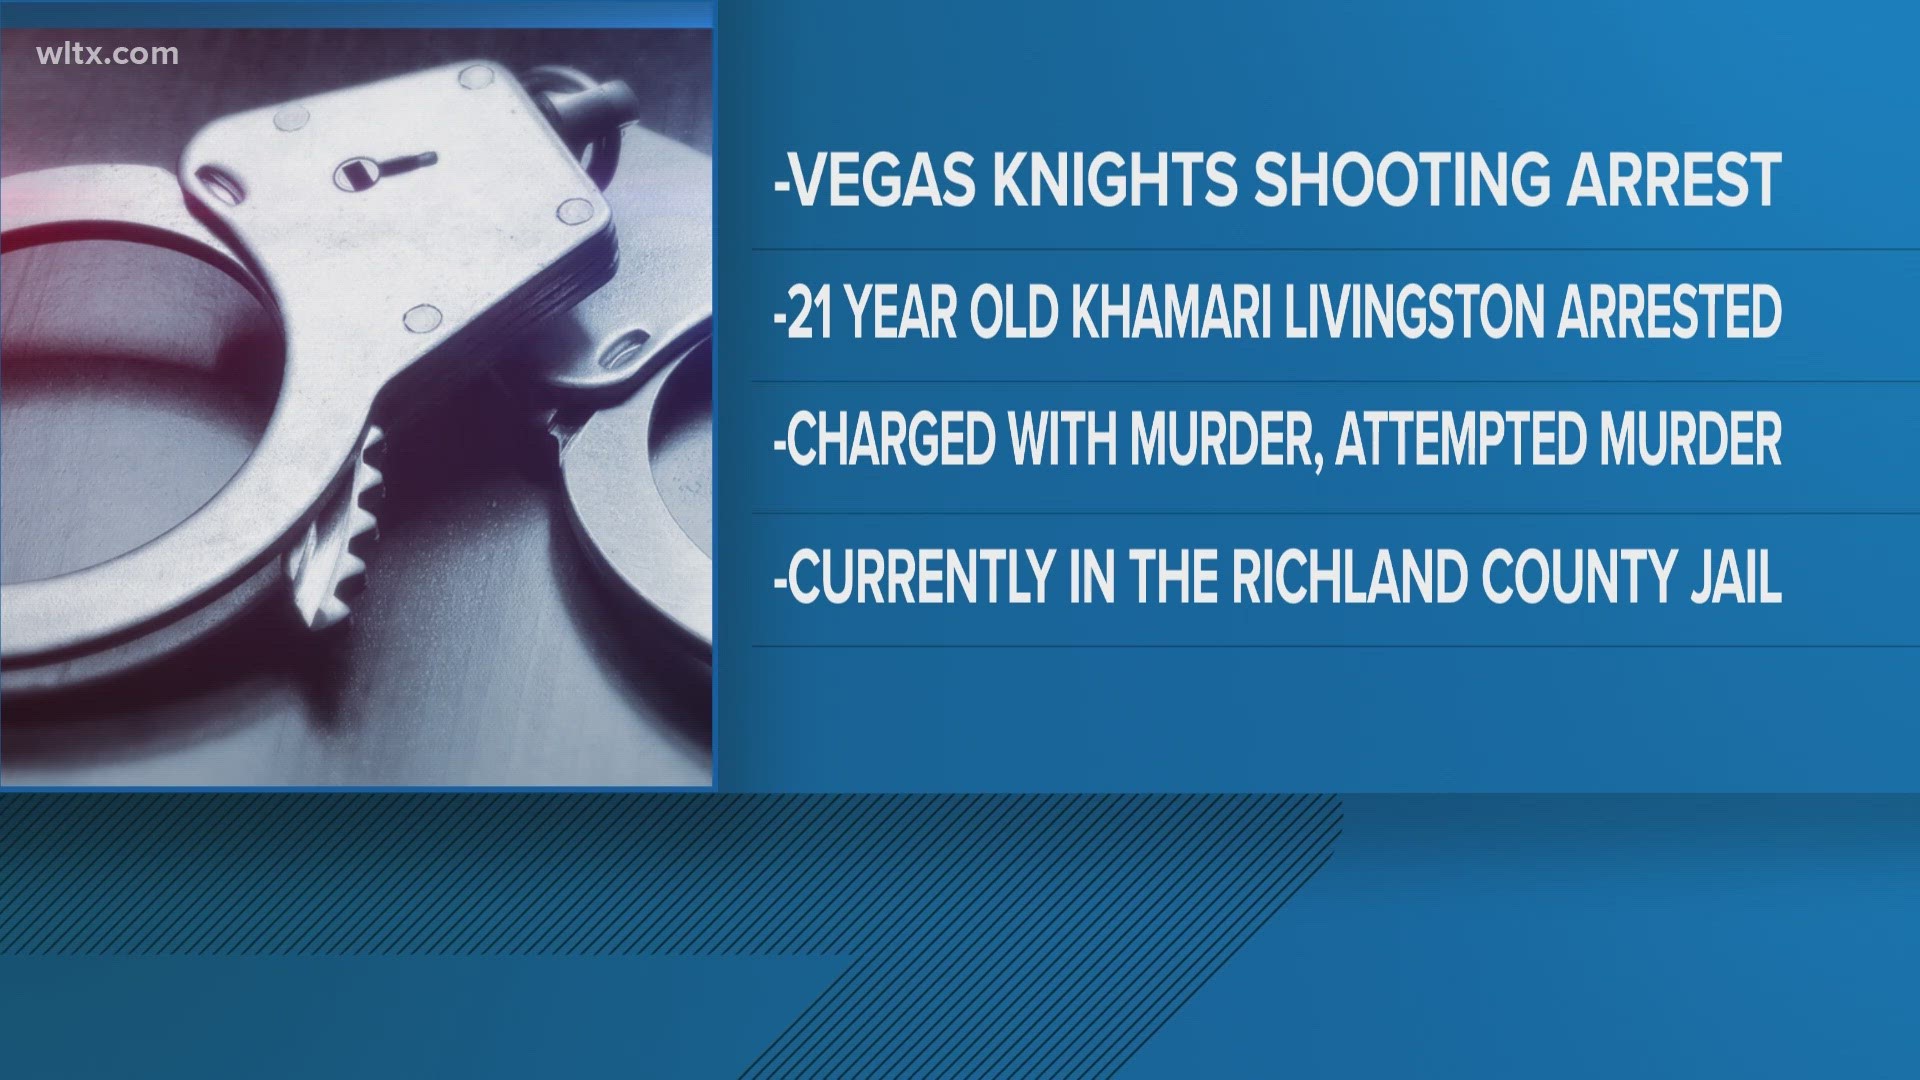 This involved the fatal shooting at a Columbia night club, Vegas Knights.